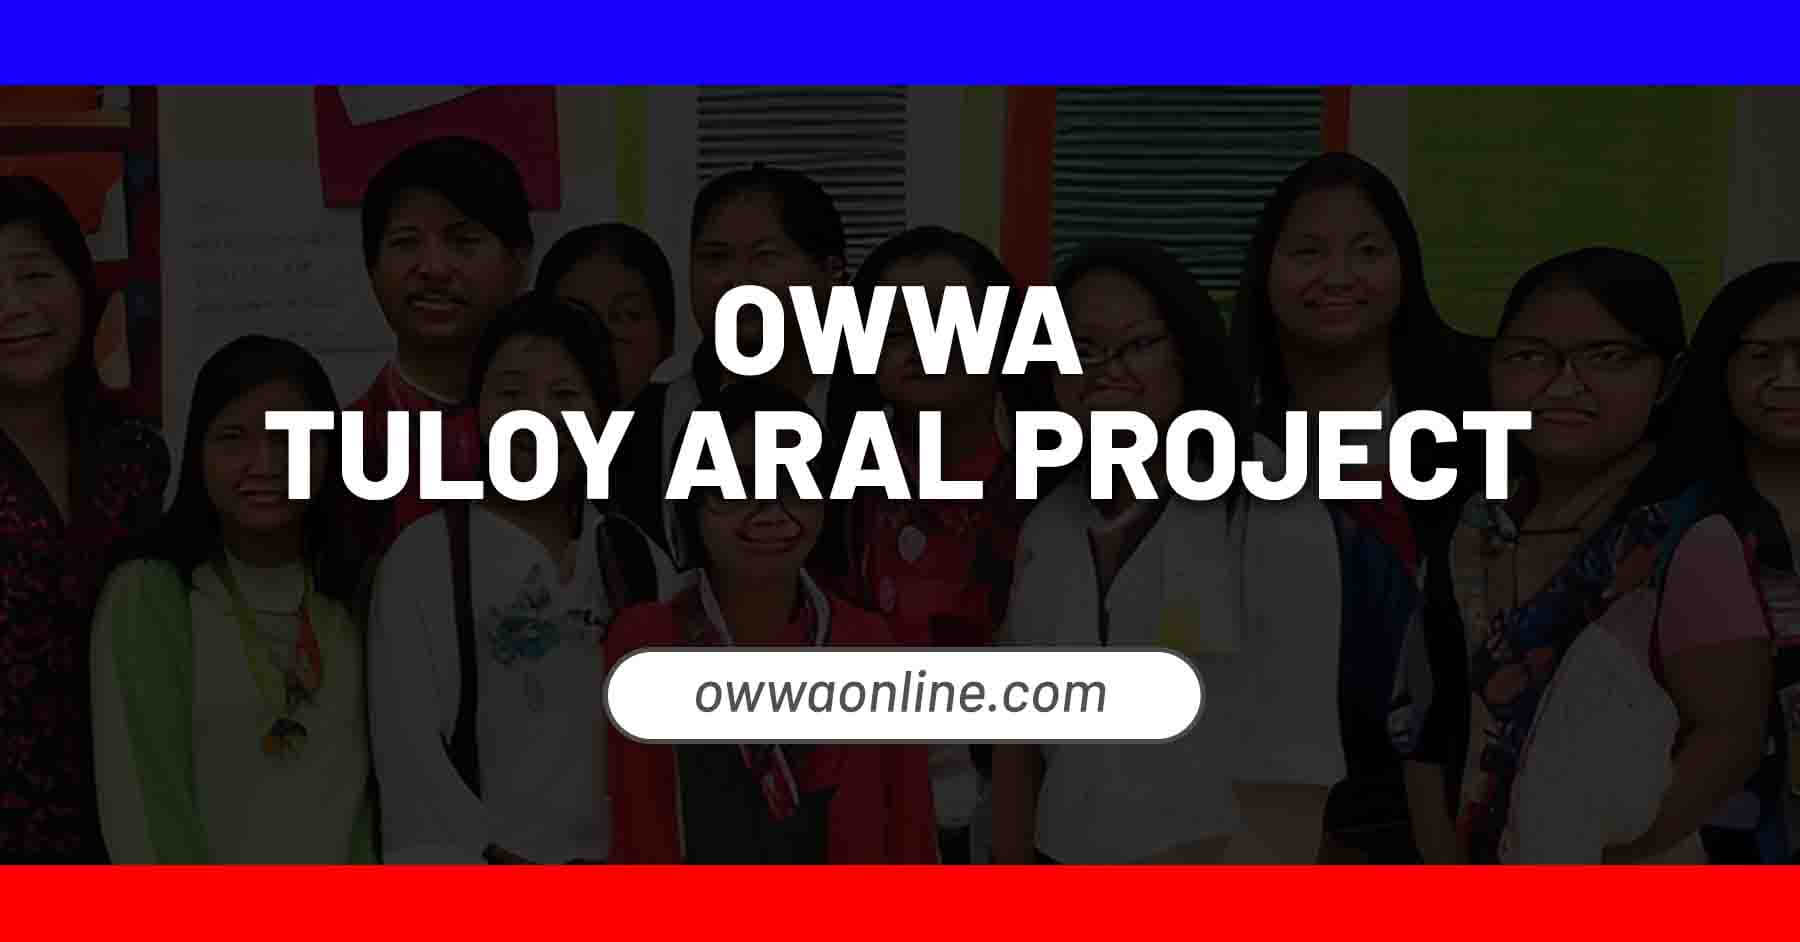 owwa tuloy aral project scholarship